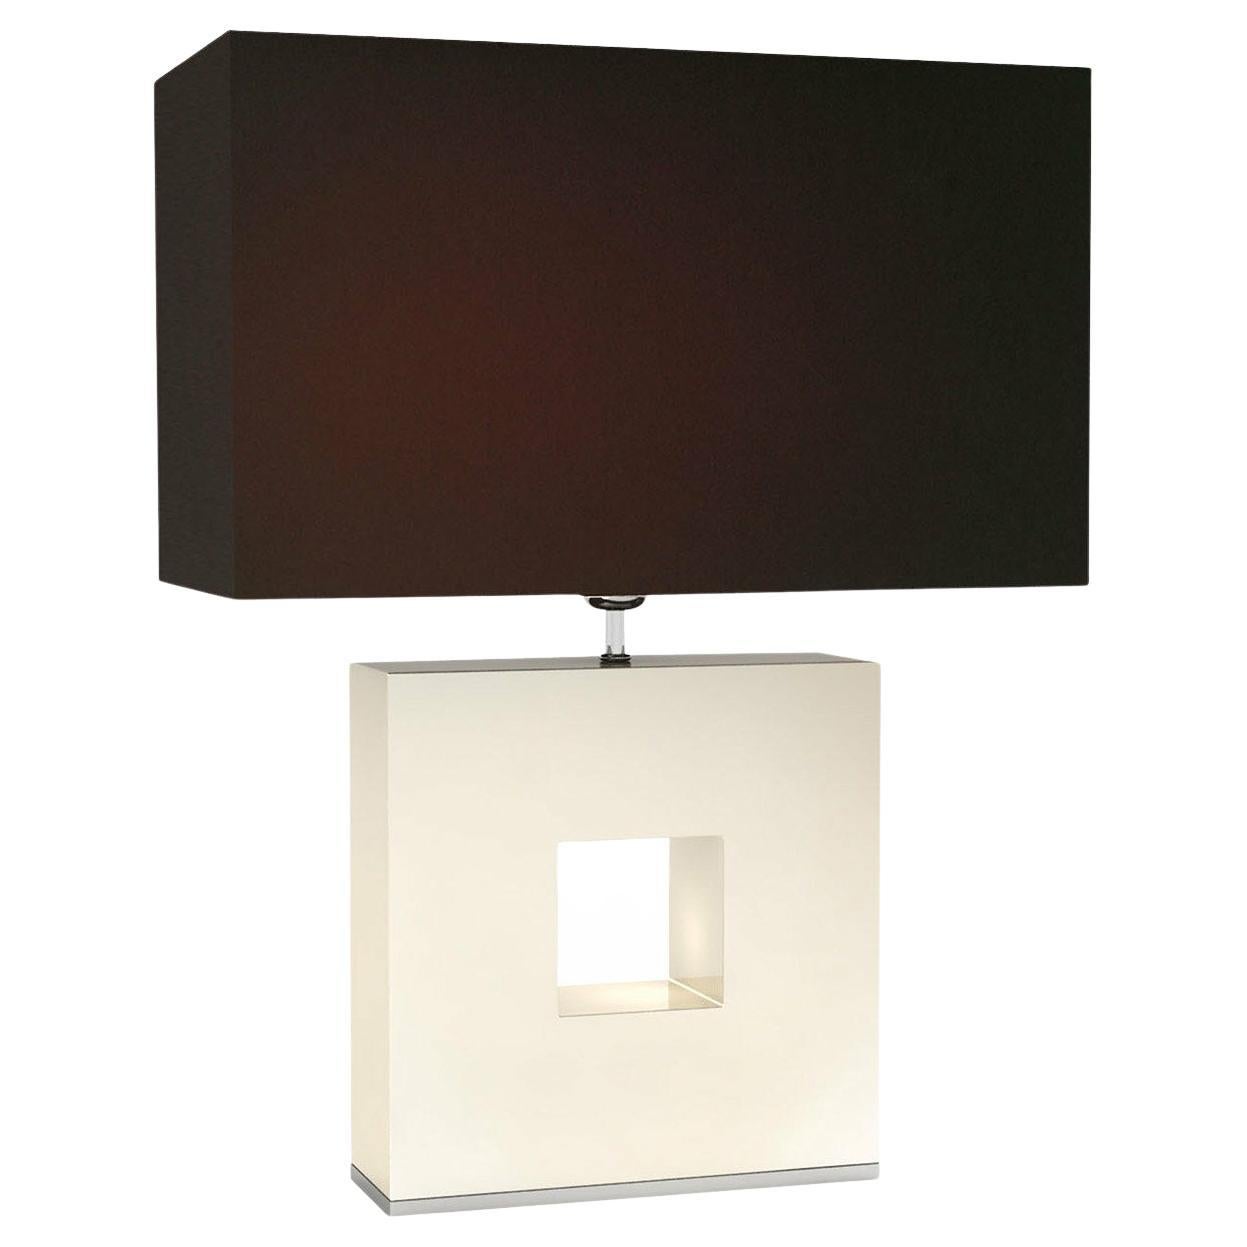 Cobalto White Table Lamp with Black Shade